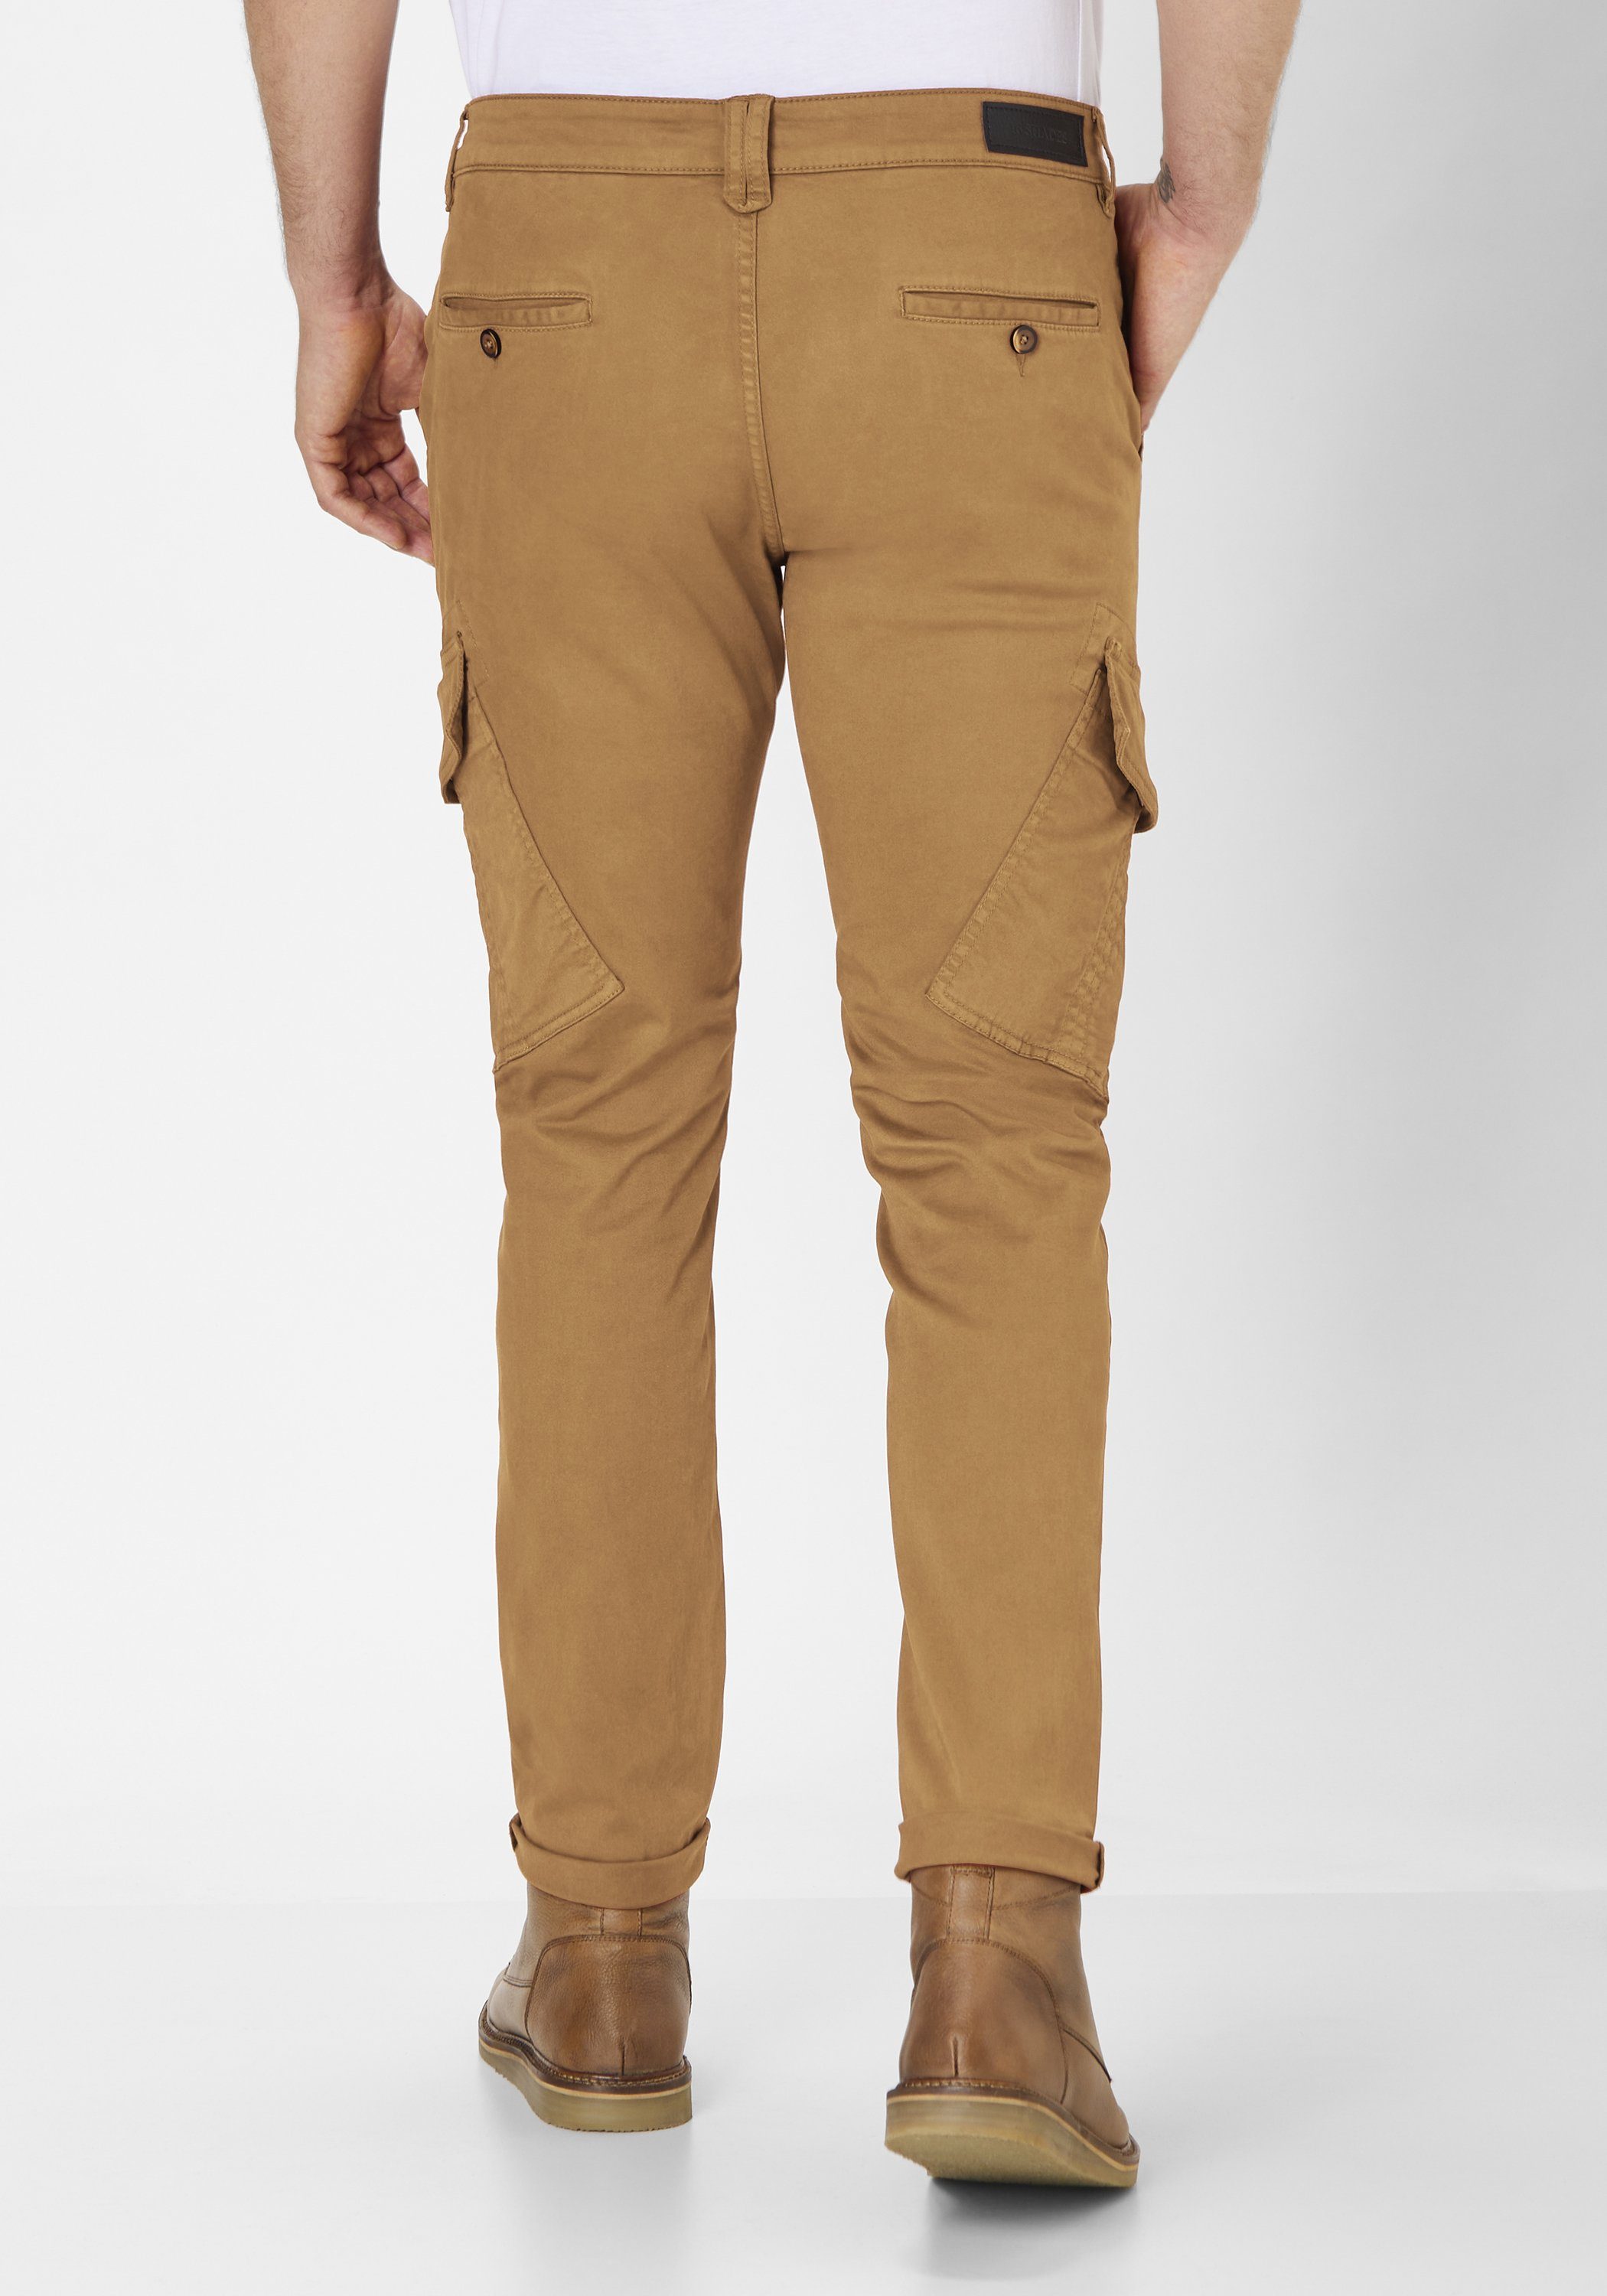 Redpoint Cargohose Fit Chinohose- Kingston Edition 16 camel Tapered Shades